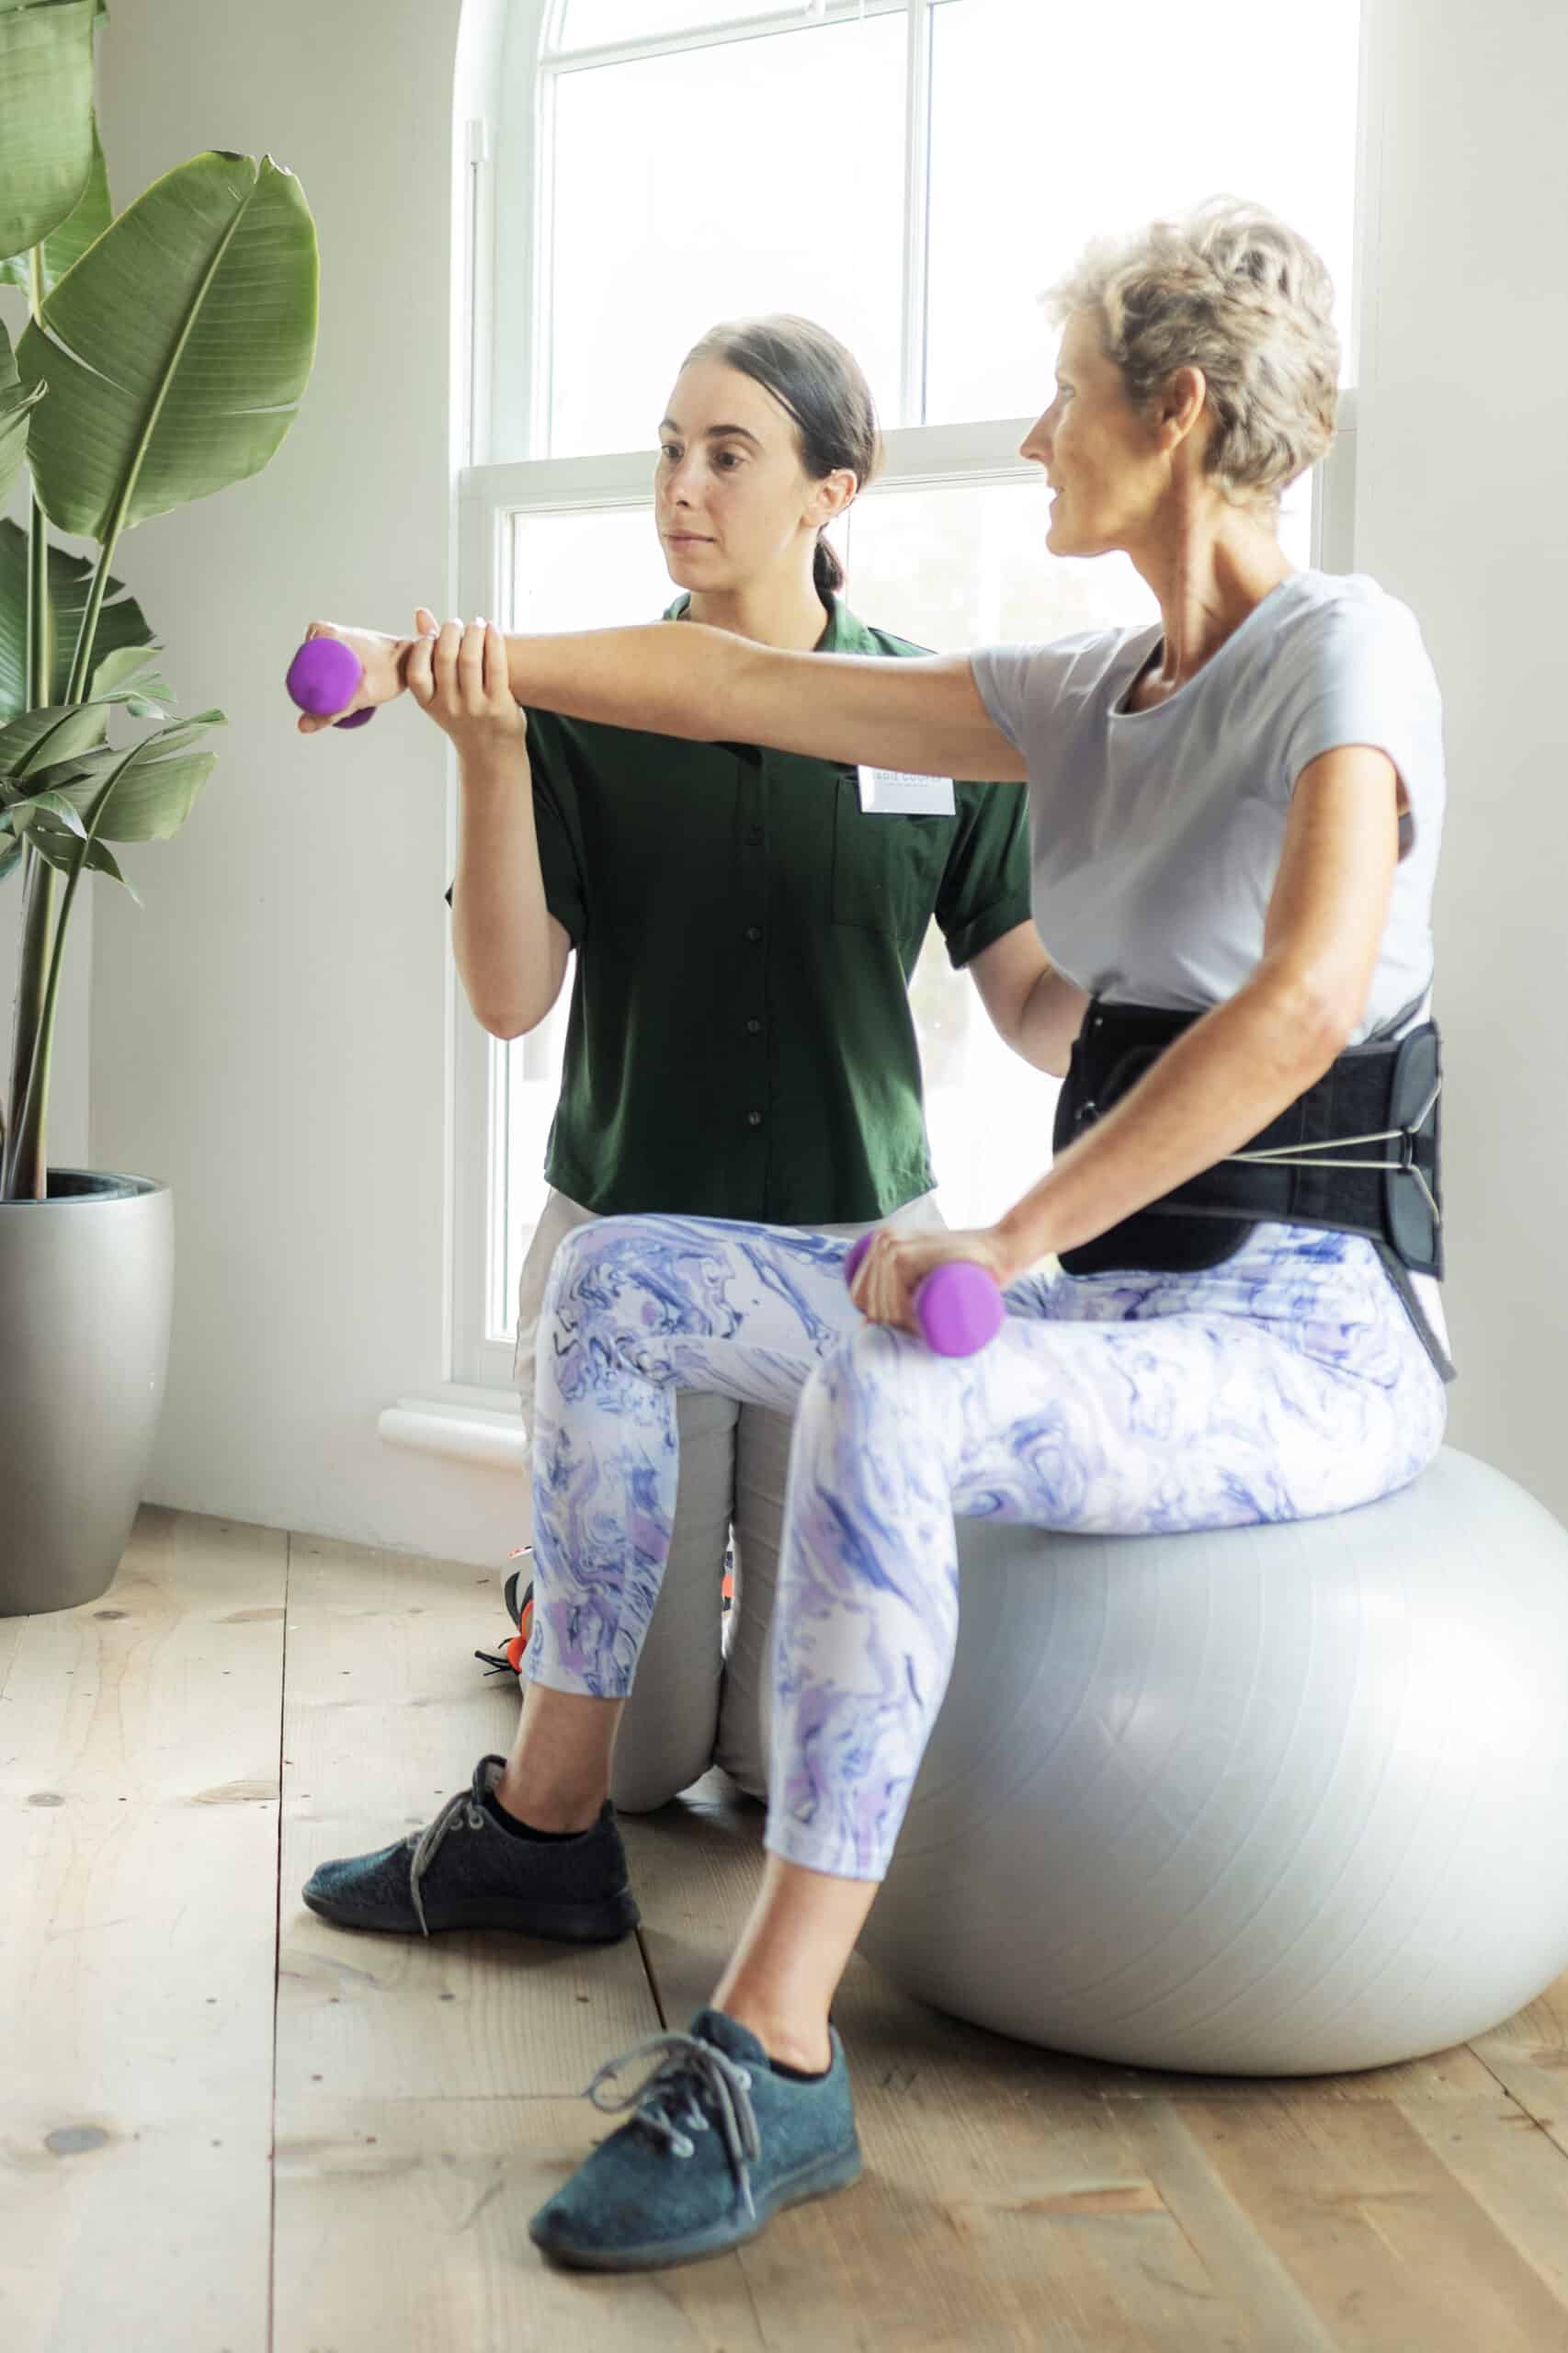 Mature woman doing physical therapy